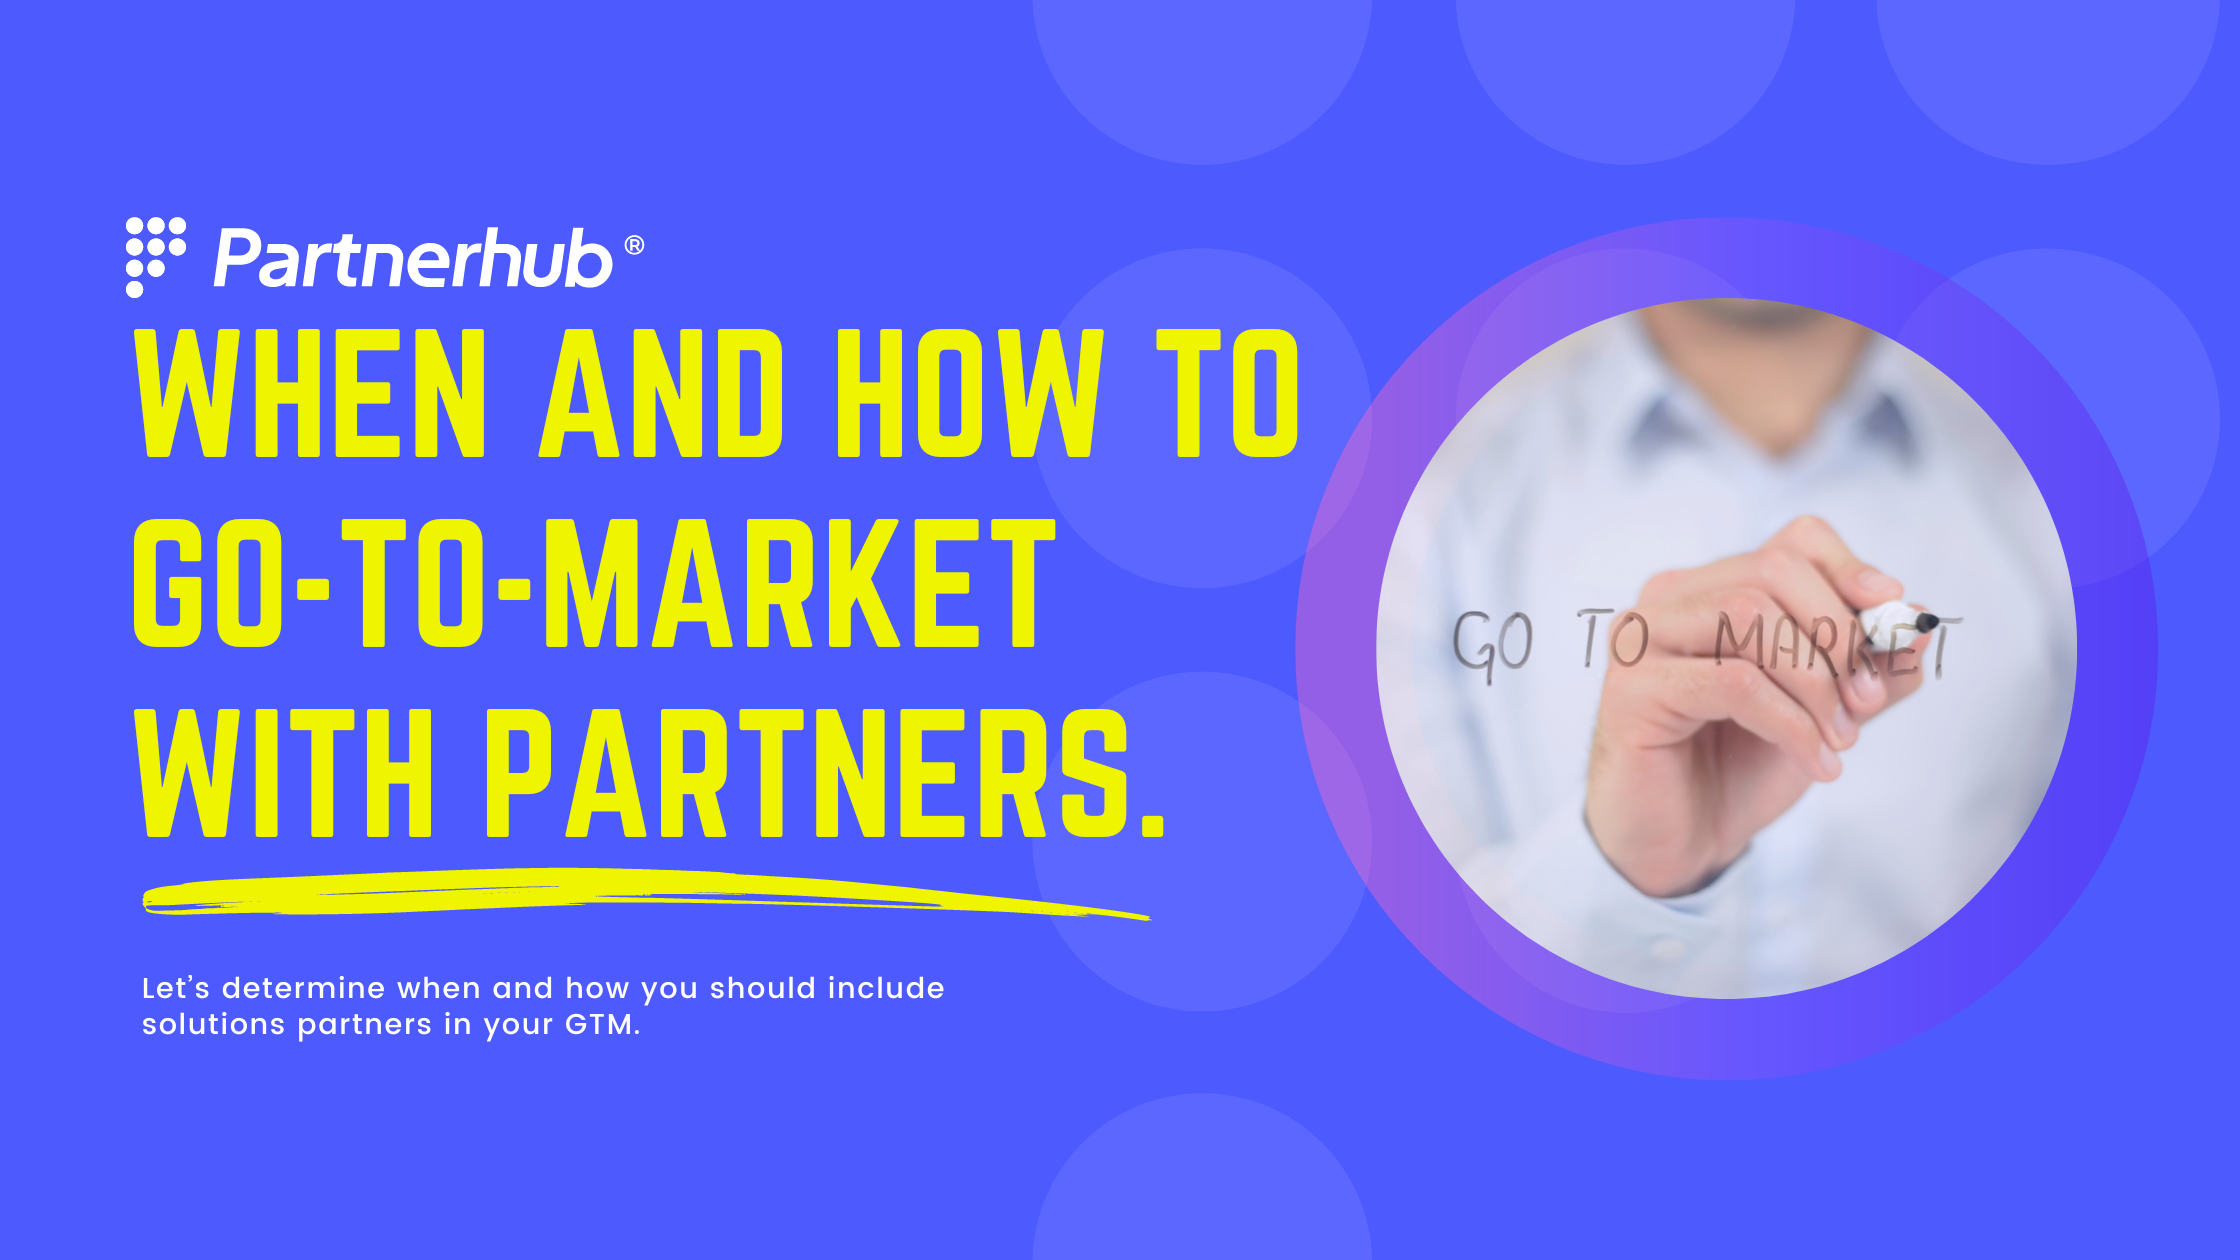 When and how to go-to-market  with partners.